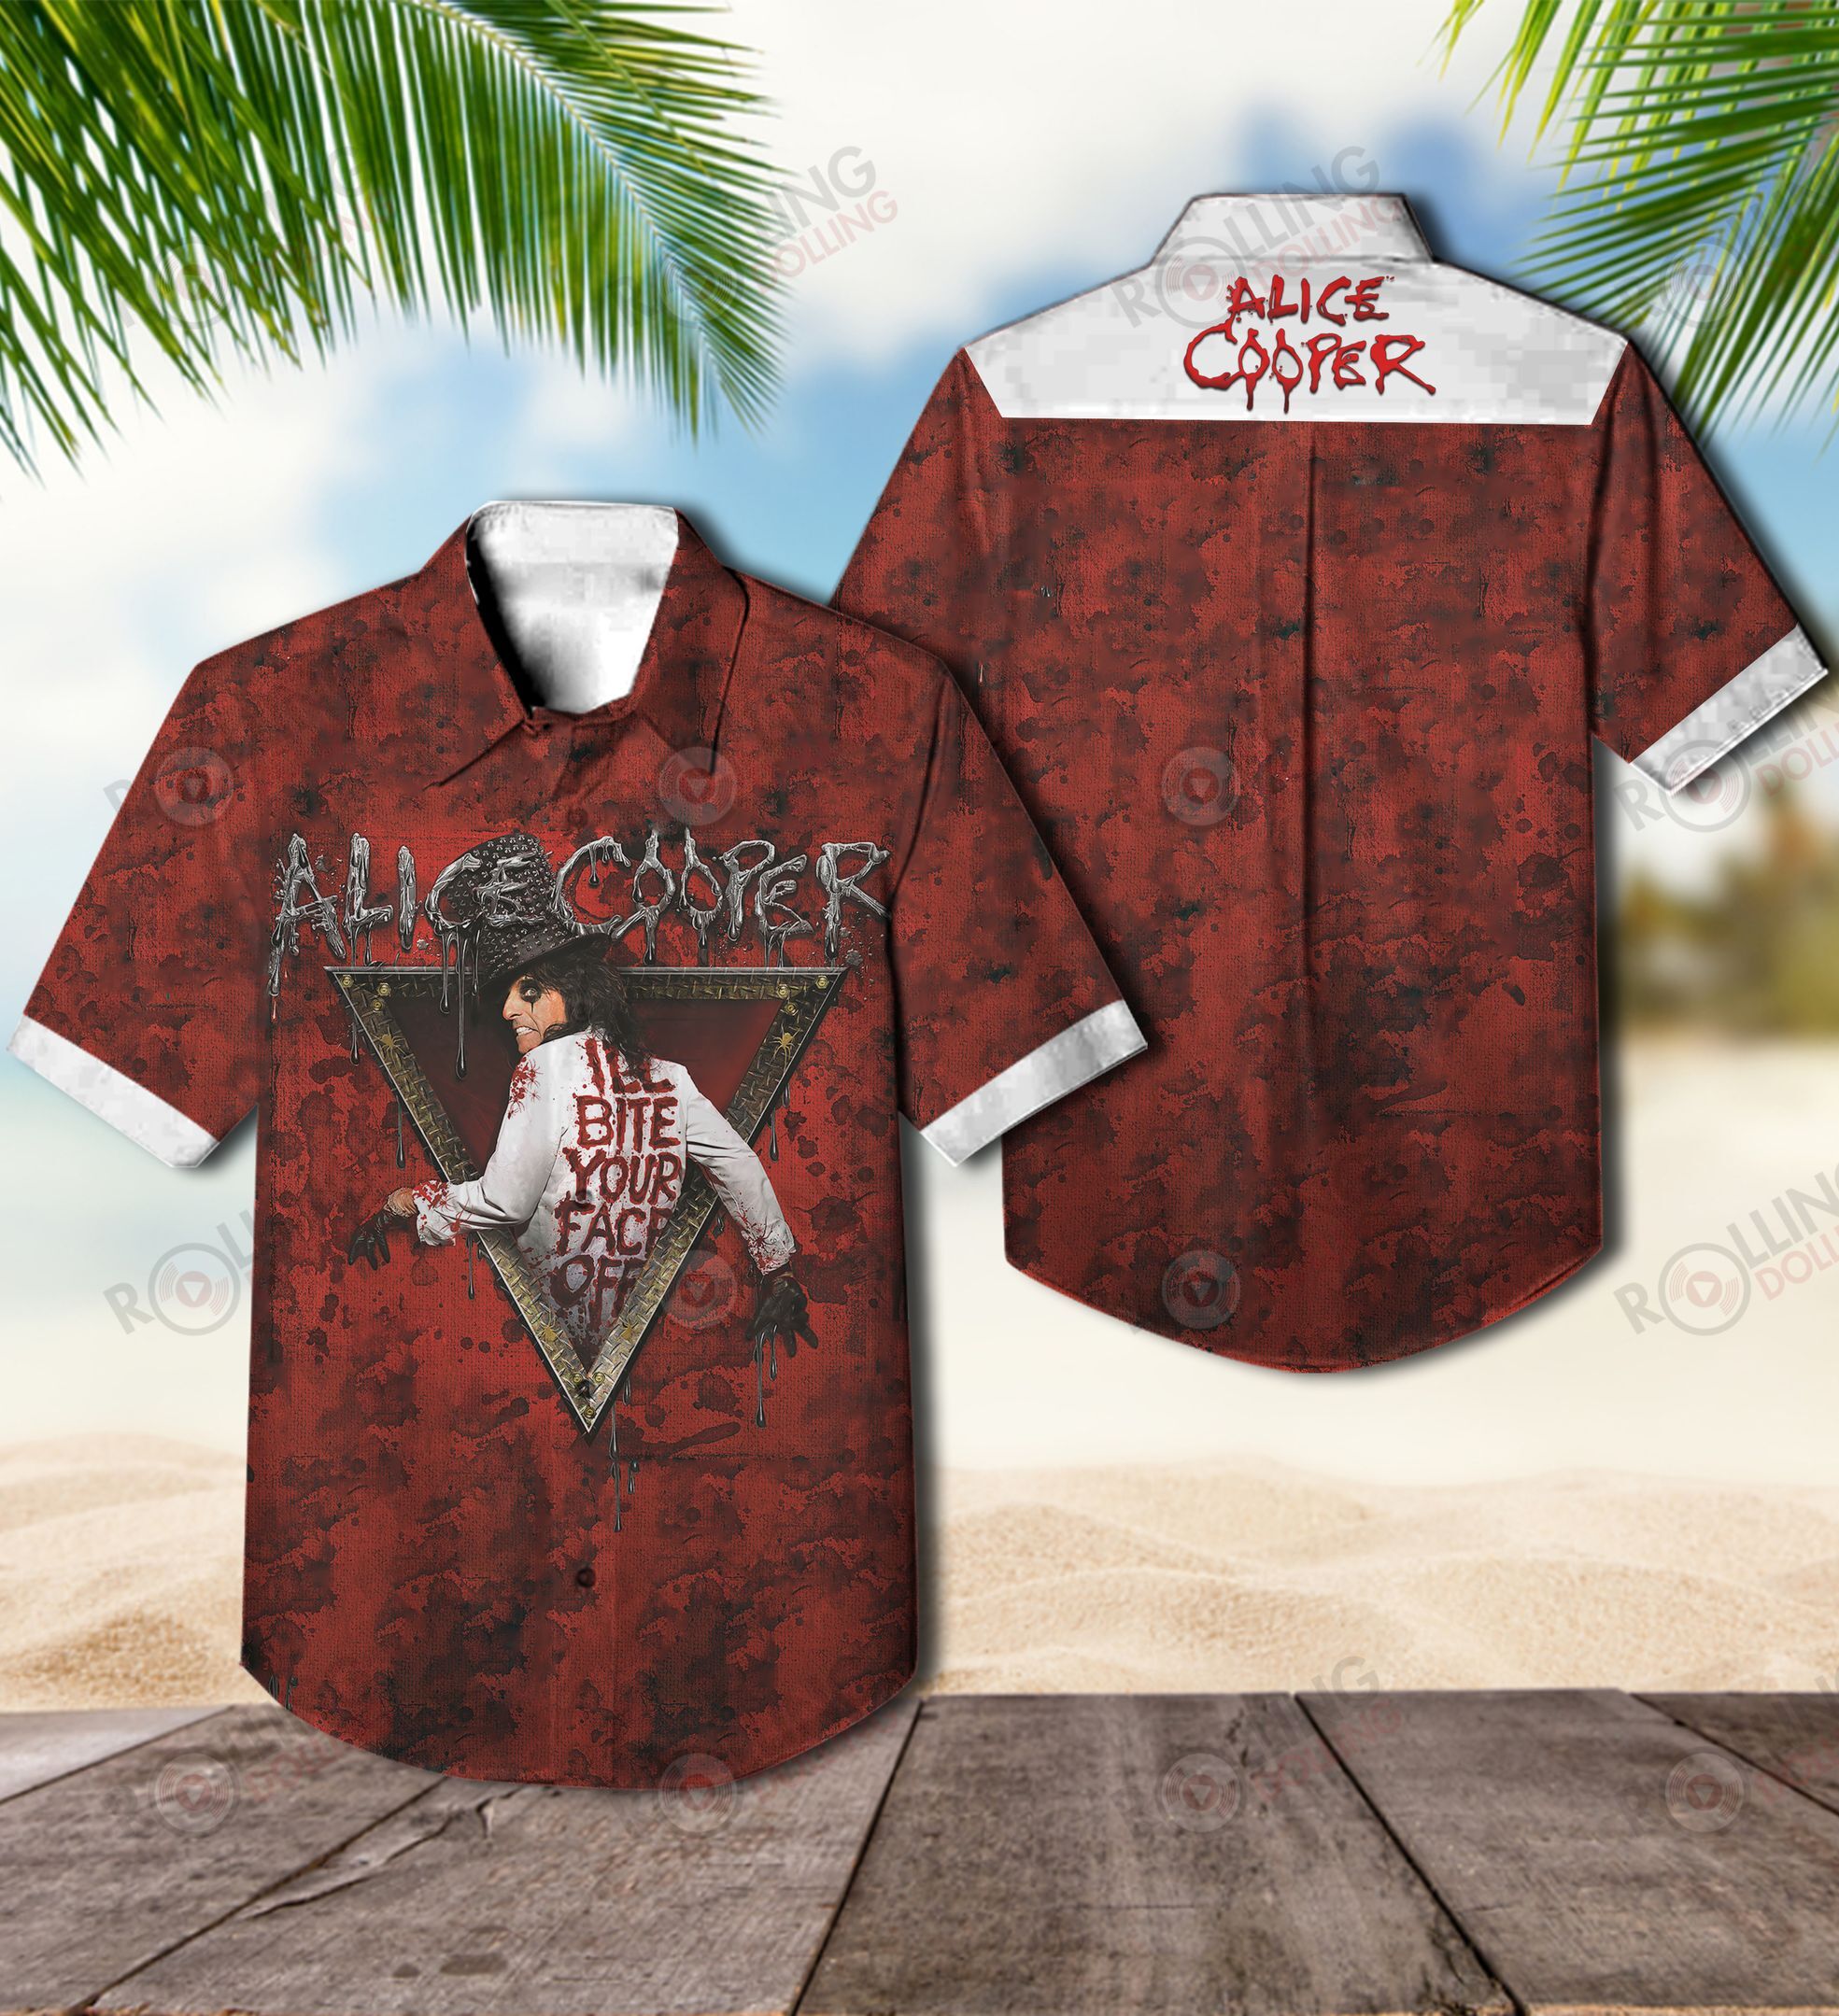 For summer, consider wearing This Amazing Hawaiian Shirt shirt in our store 24